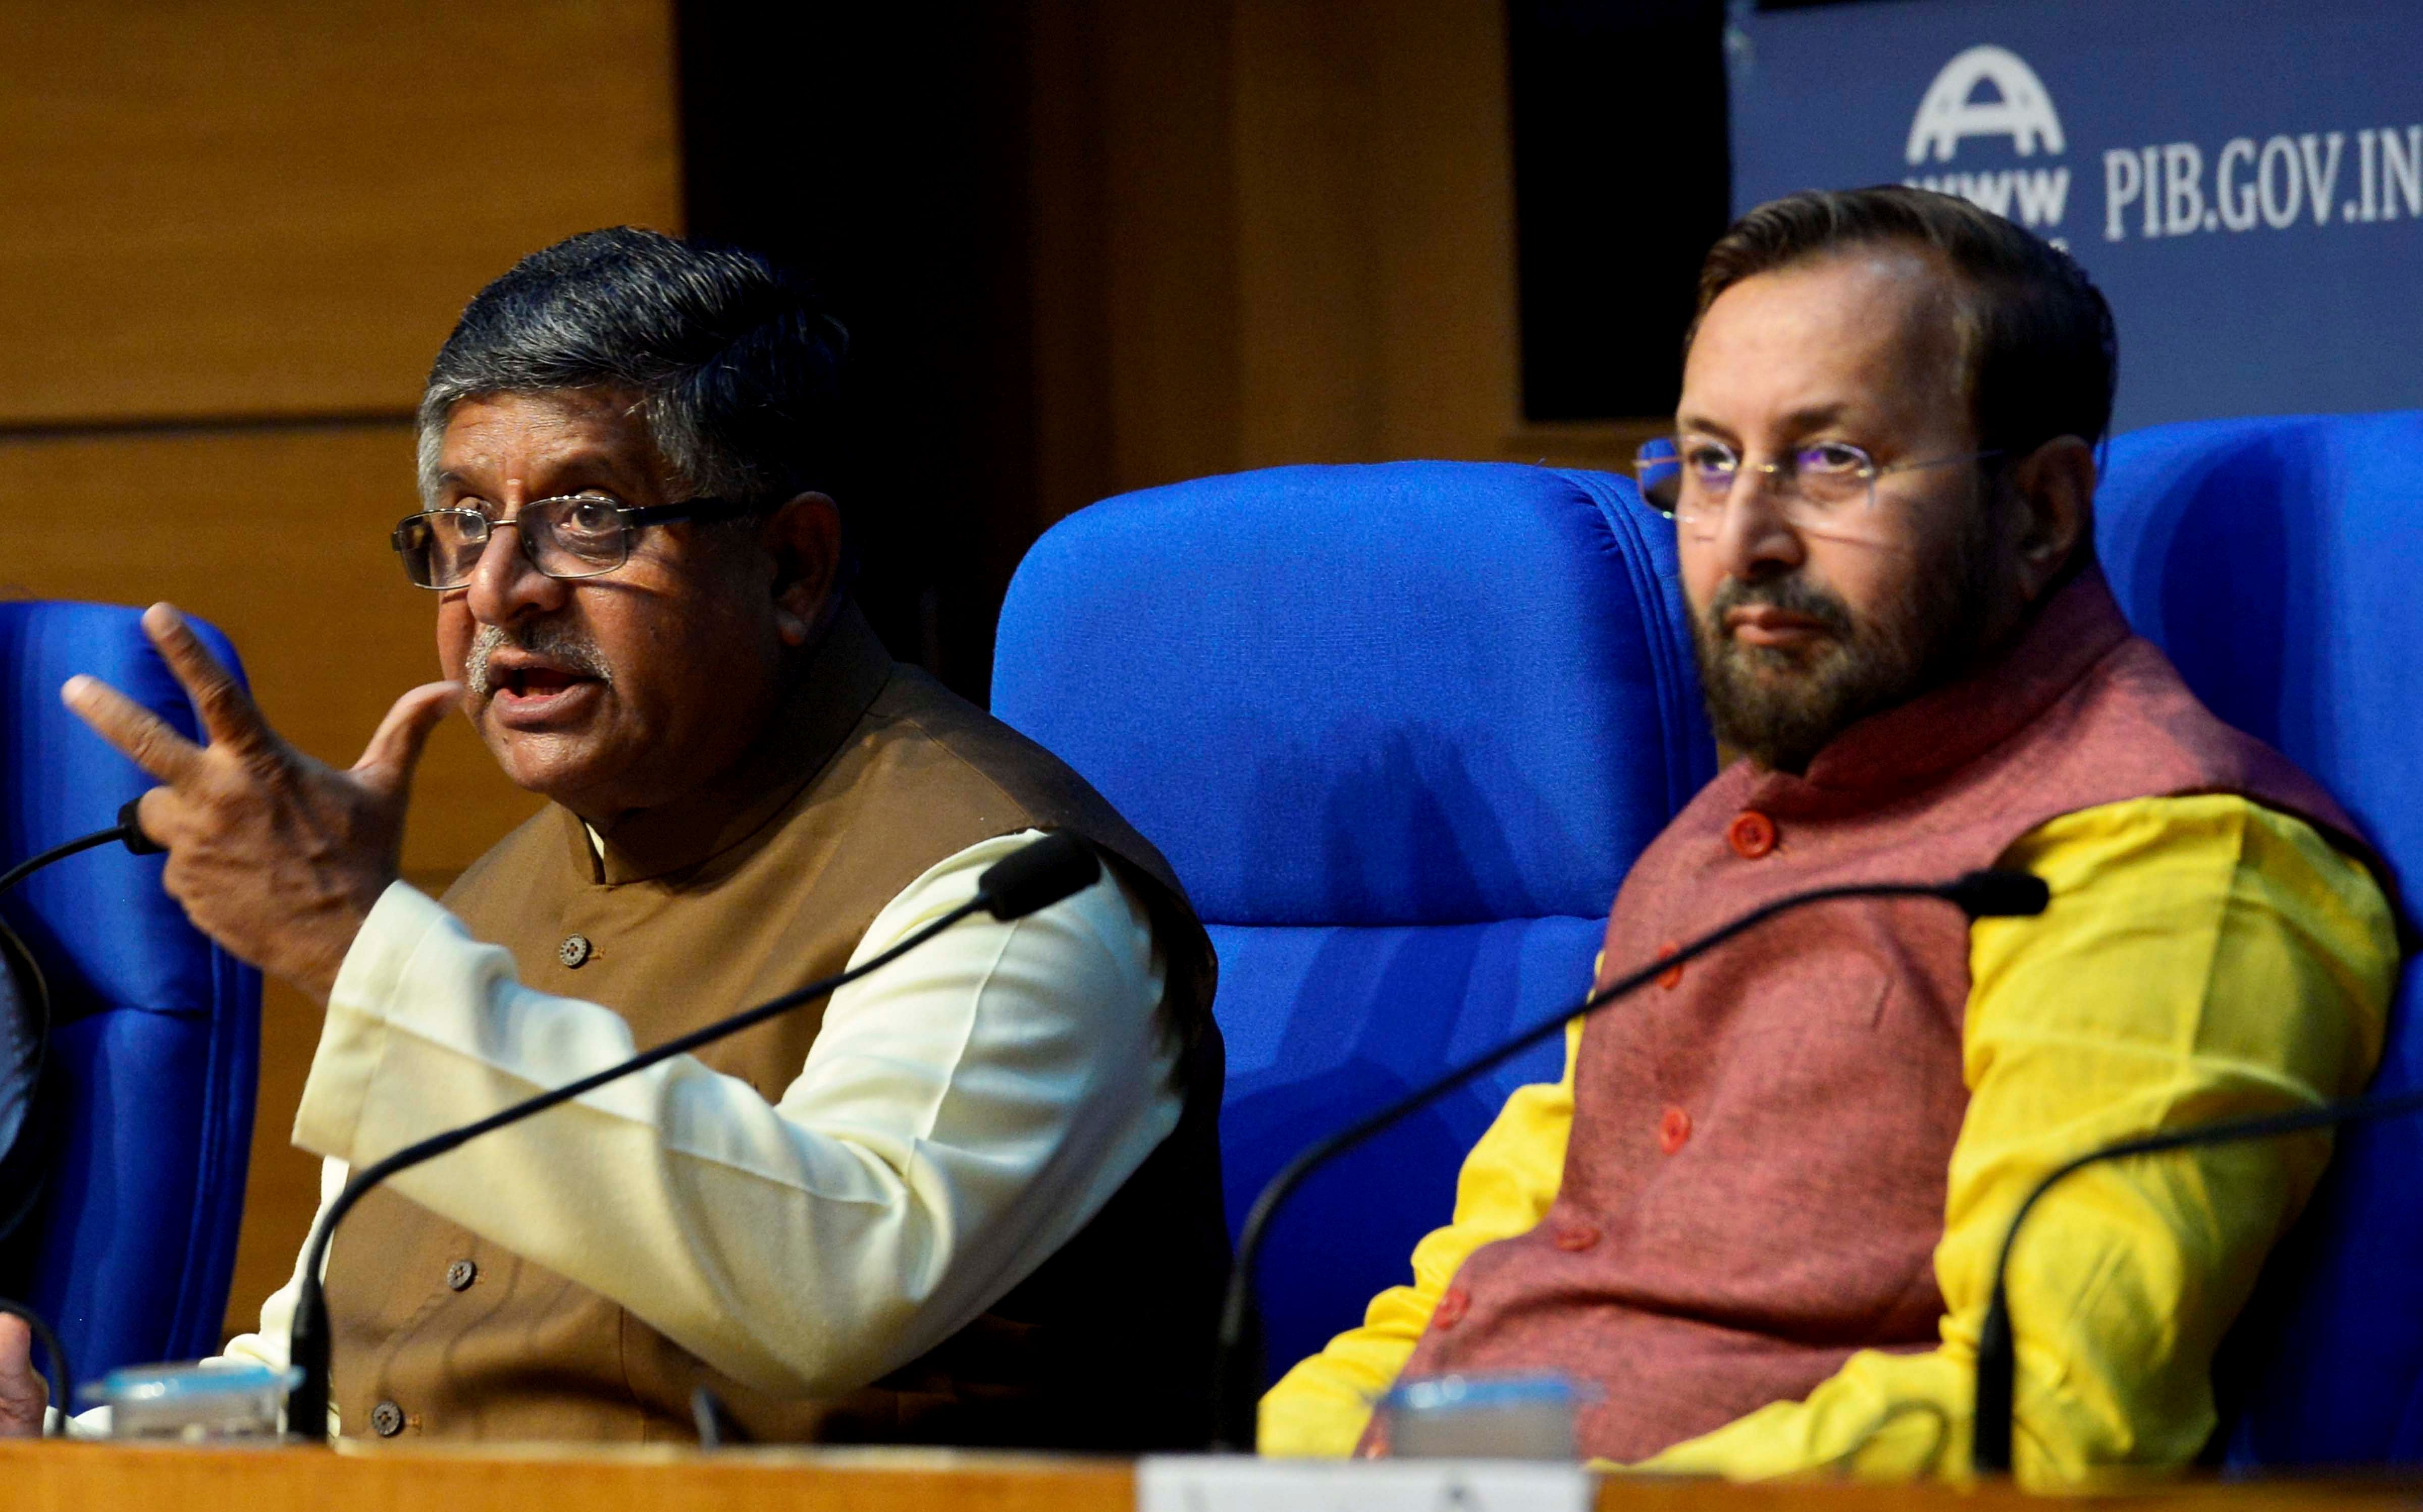  Union Ministers Prakash Javadekar (R) and Ravi Shankar Prasad during a press conference after the cabinet meeting, in New Delhi. (PTI Photo)